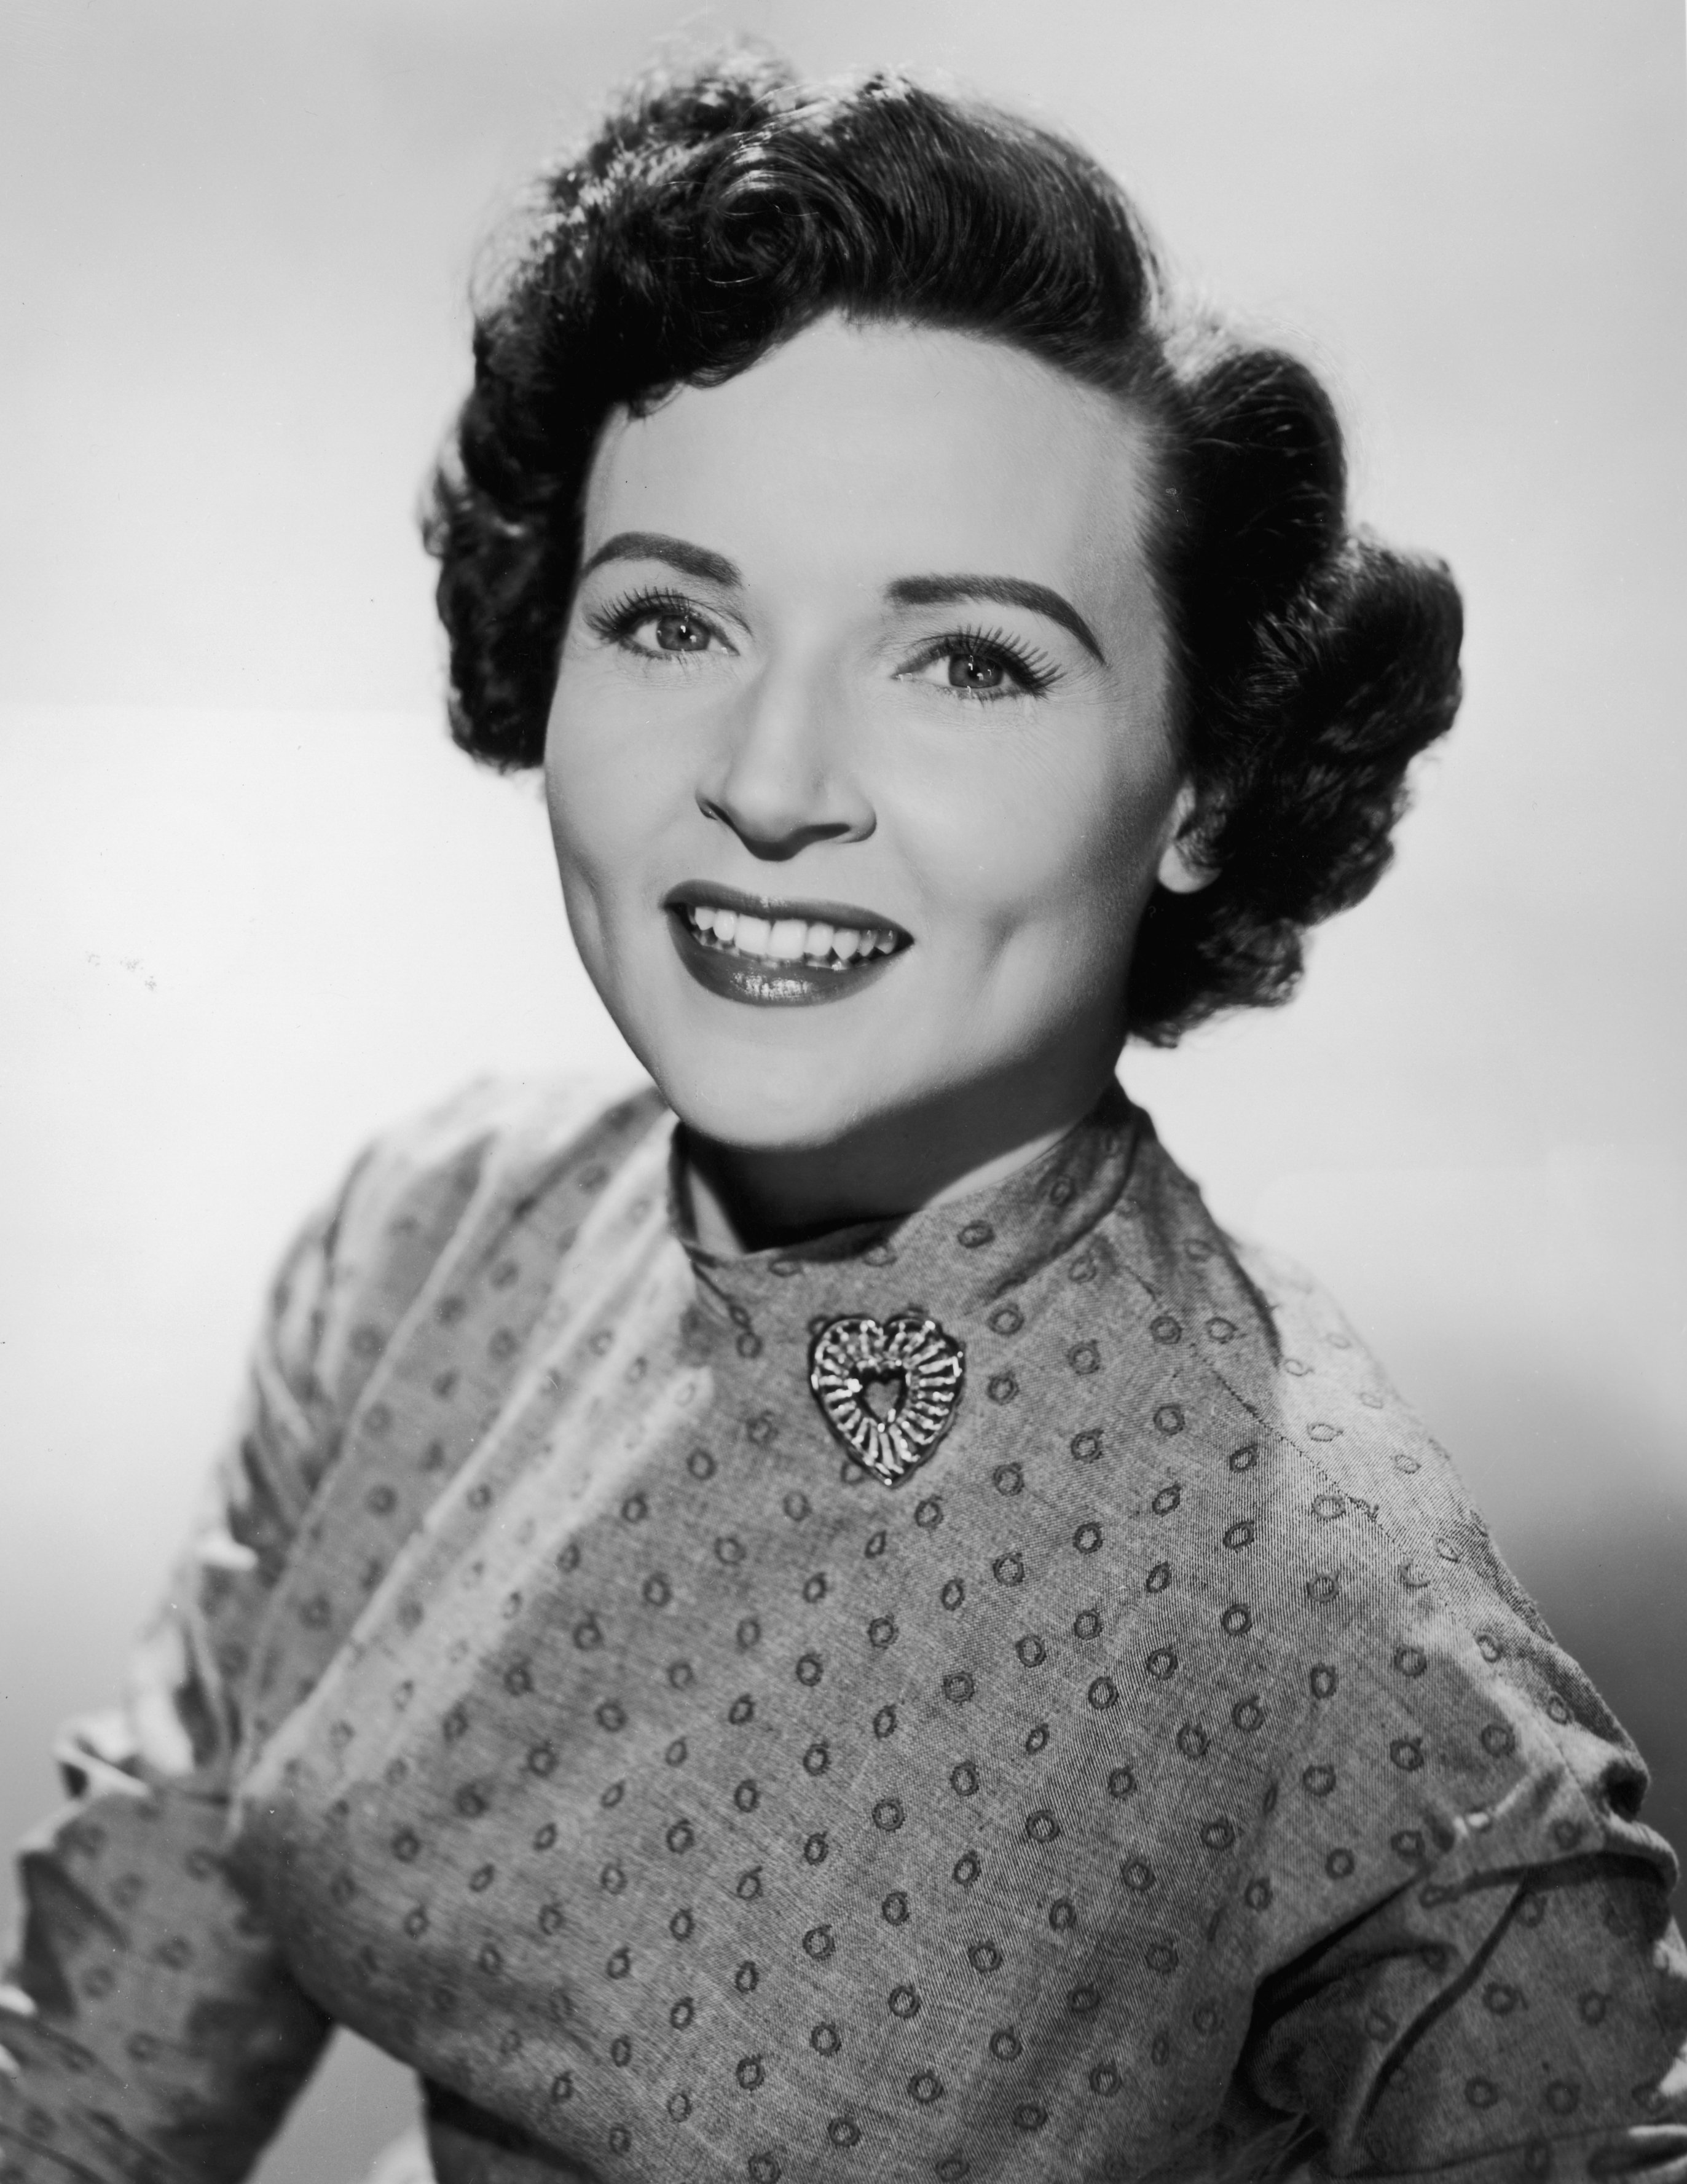 A studio portrait of actress Betty White beaming while wearing a patterned dress with a heart-shaped brooch in 1955 ┃ Source: Getty Images